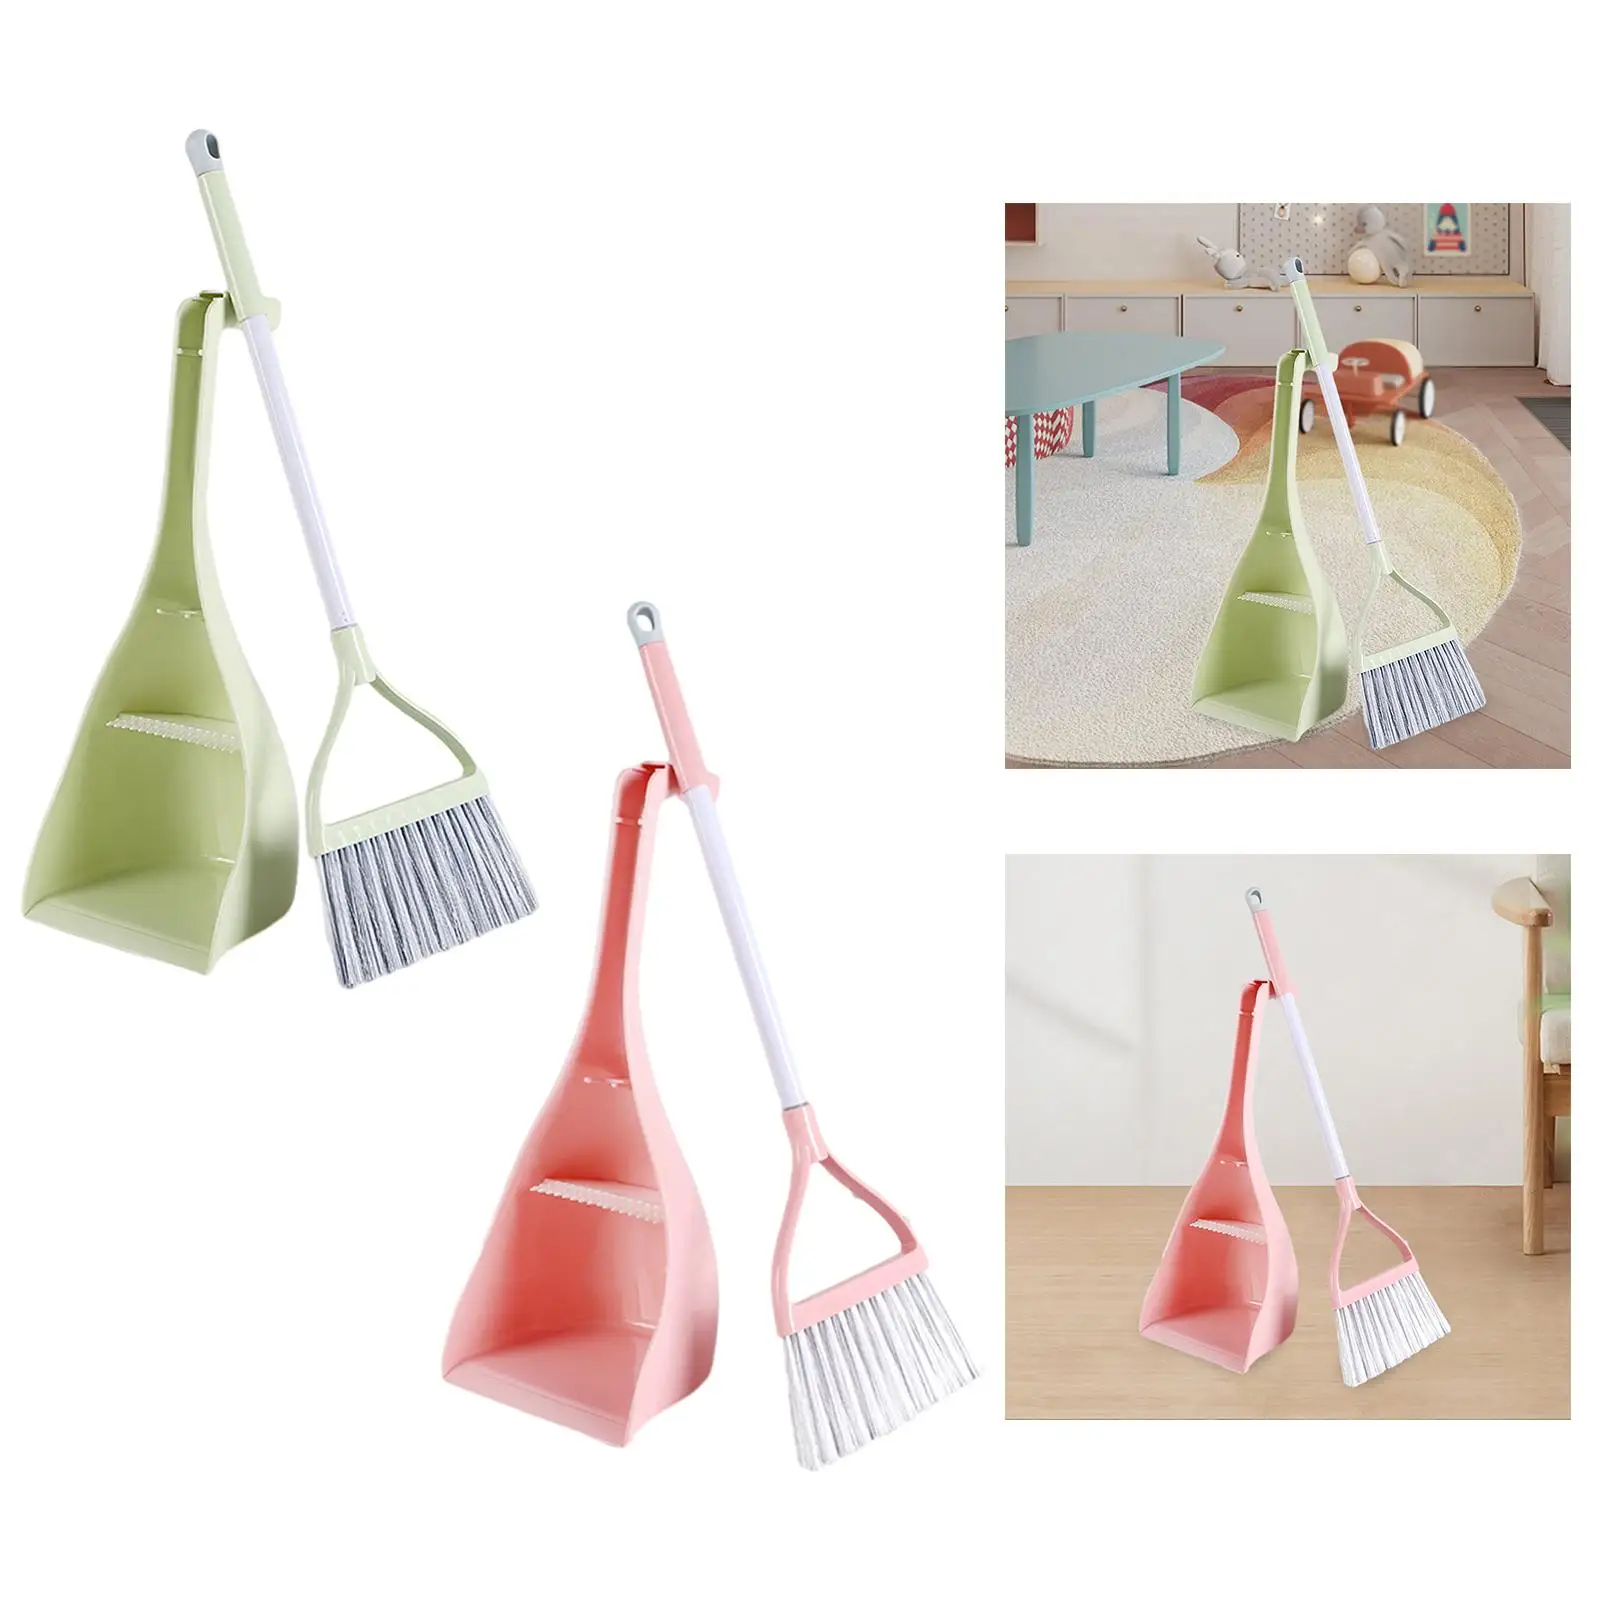 Mini Broom with Dustpan Play House Toy PP and Stainless Steel Material Pretend Housekeeping Play Set for Kindergarten Ages 3-6